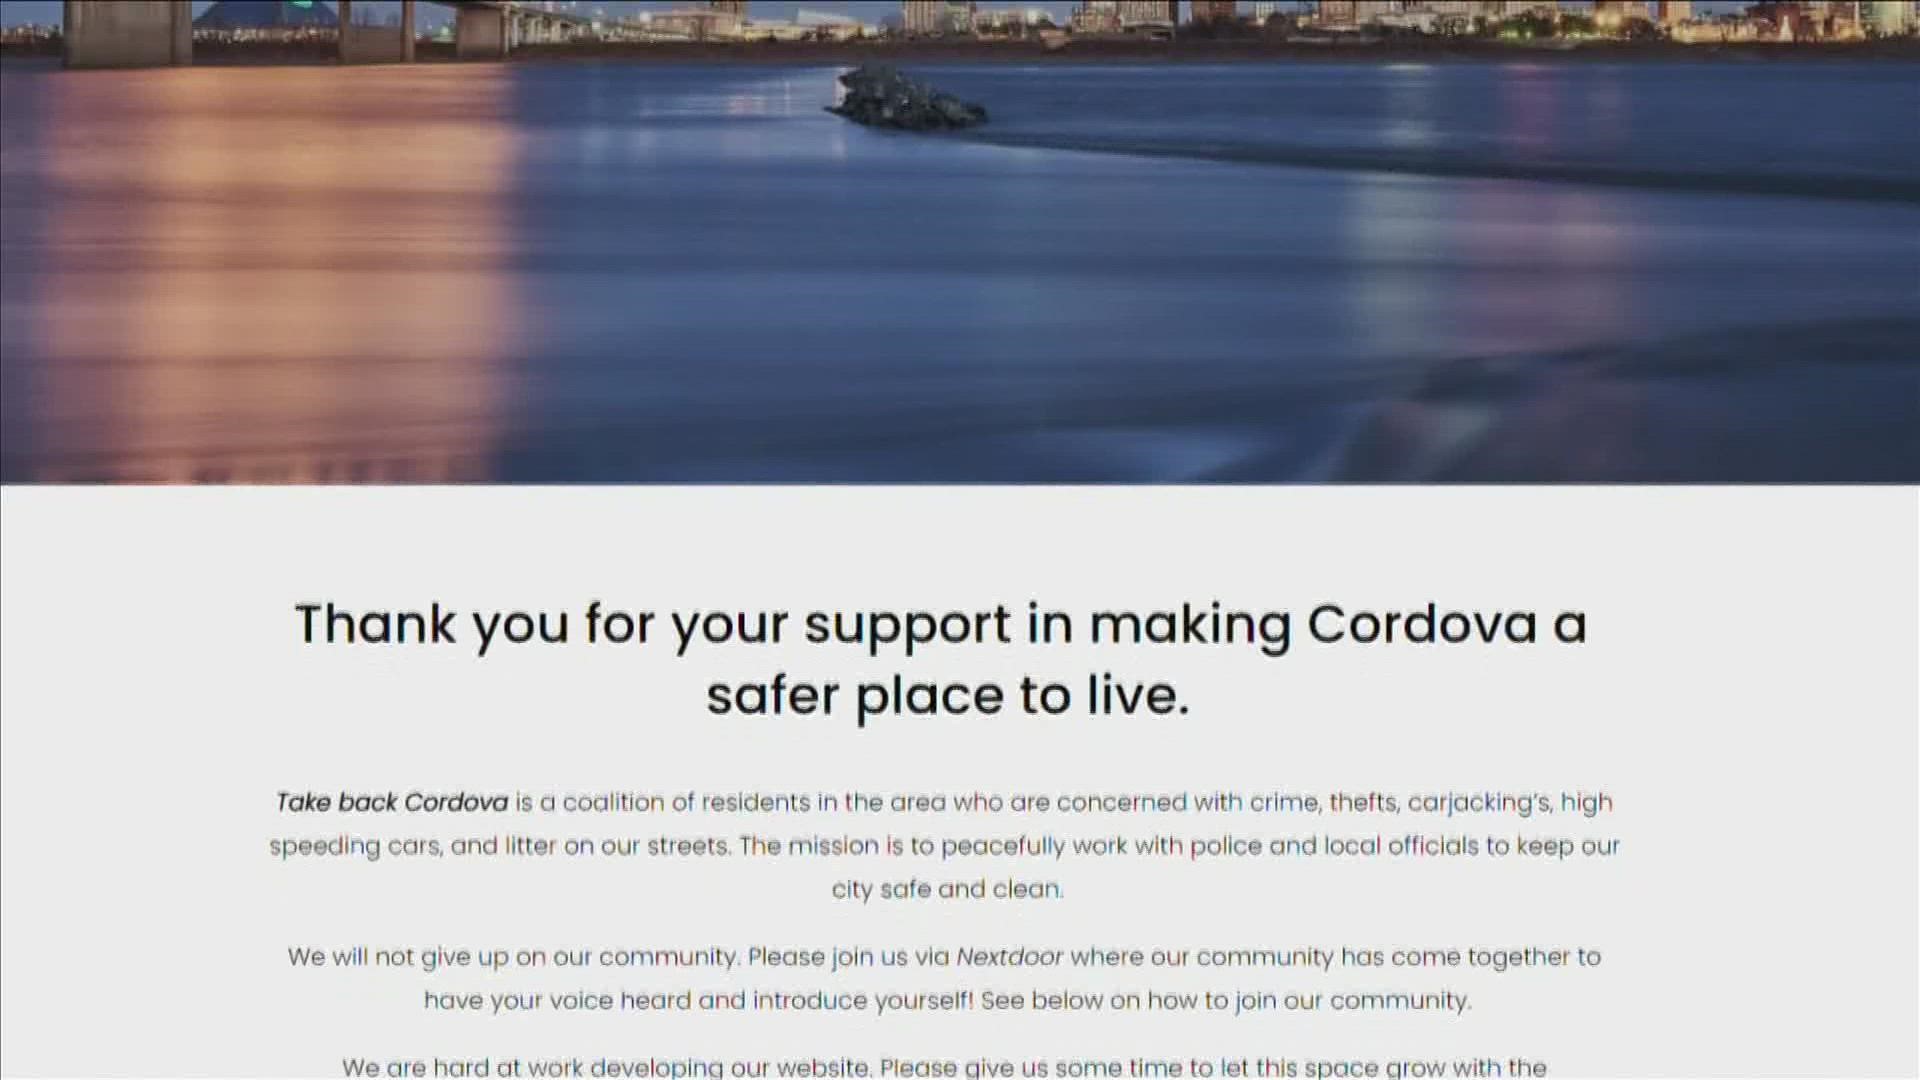 After starting 'Take Back Cordova', three weeks later, the group has 600 members willing to work together and alongside police and elected officials.